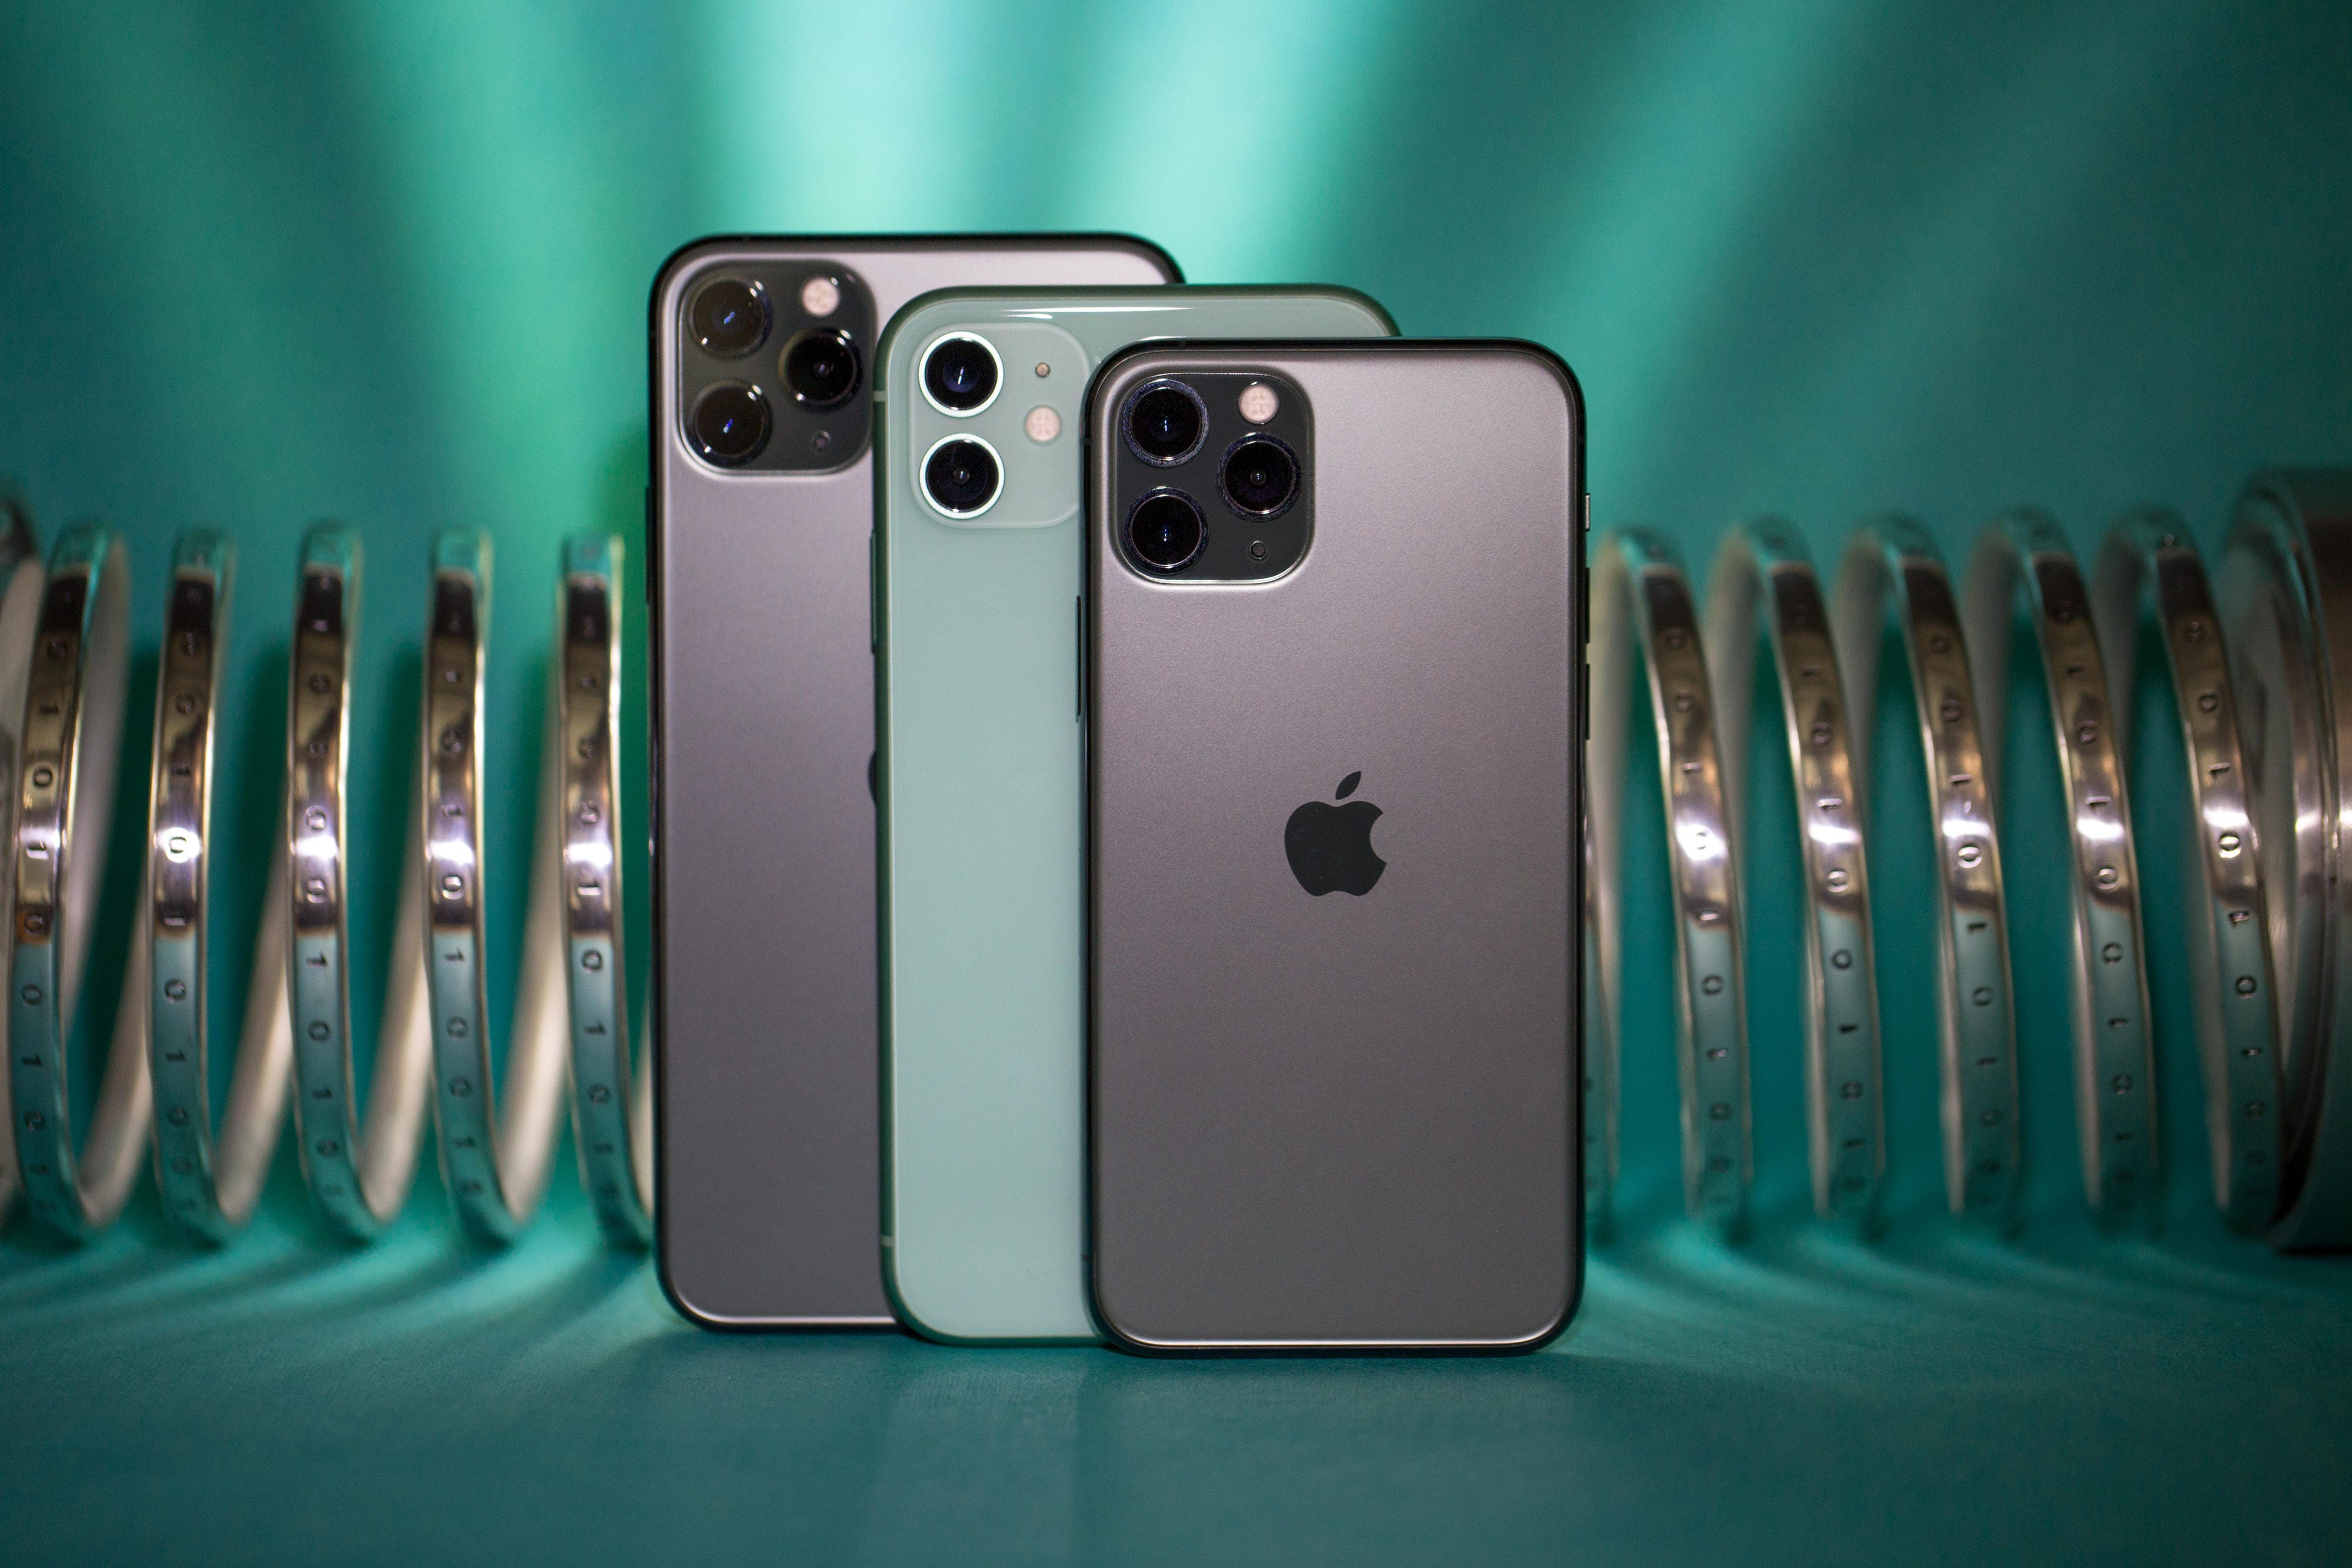 How to buy a new iPhone 11 and 11 Pro right now